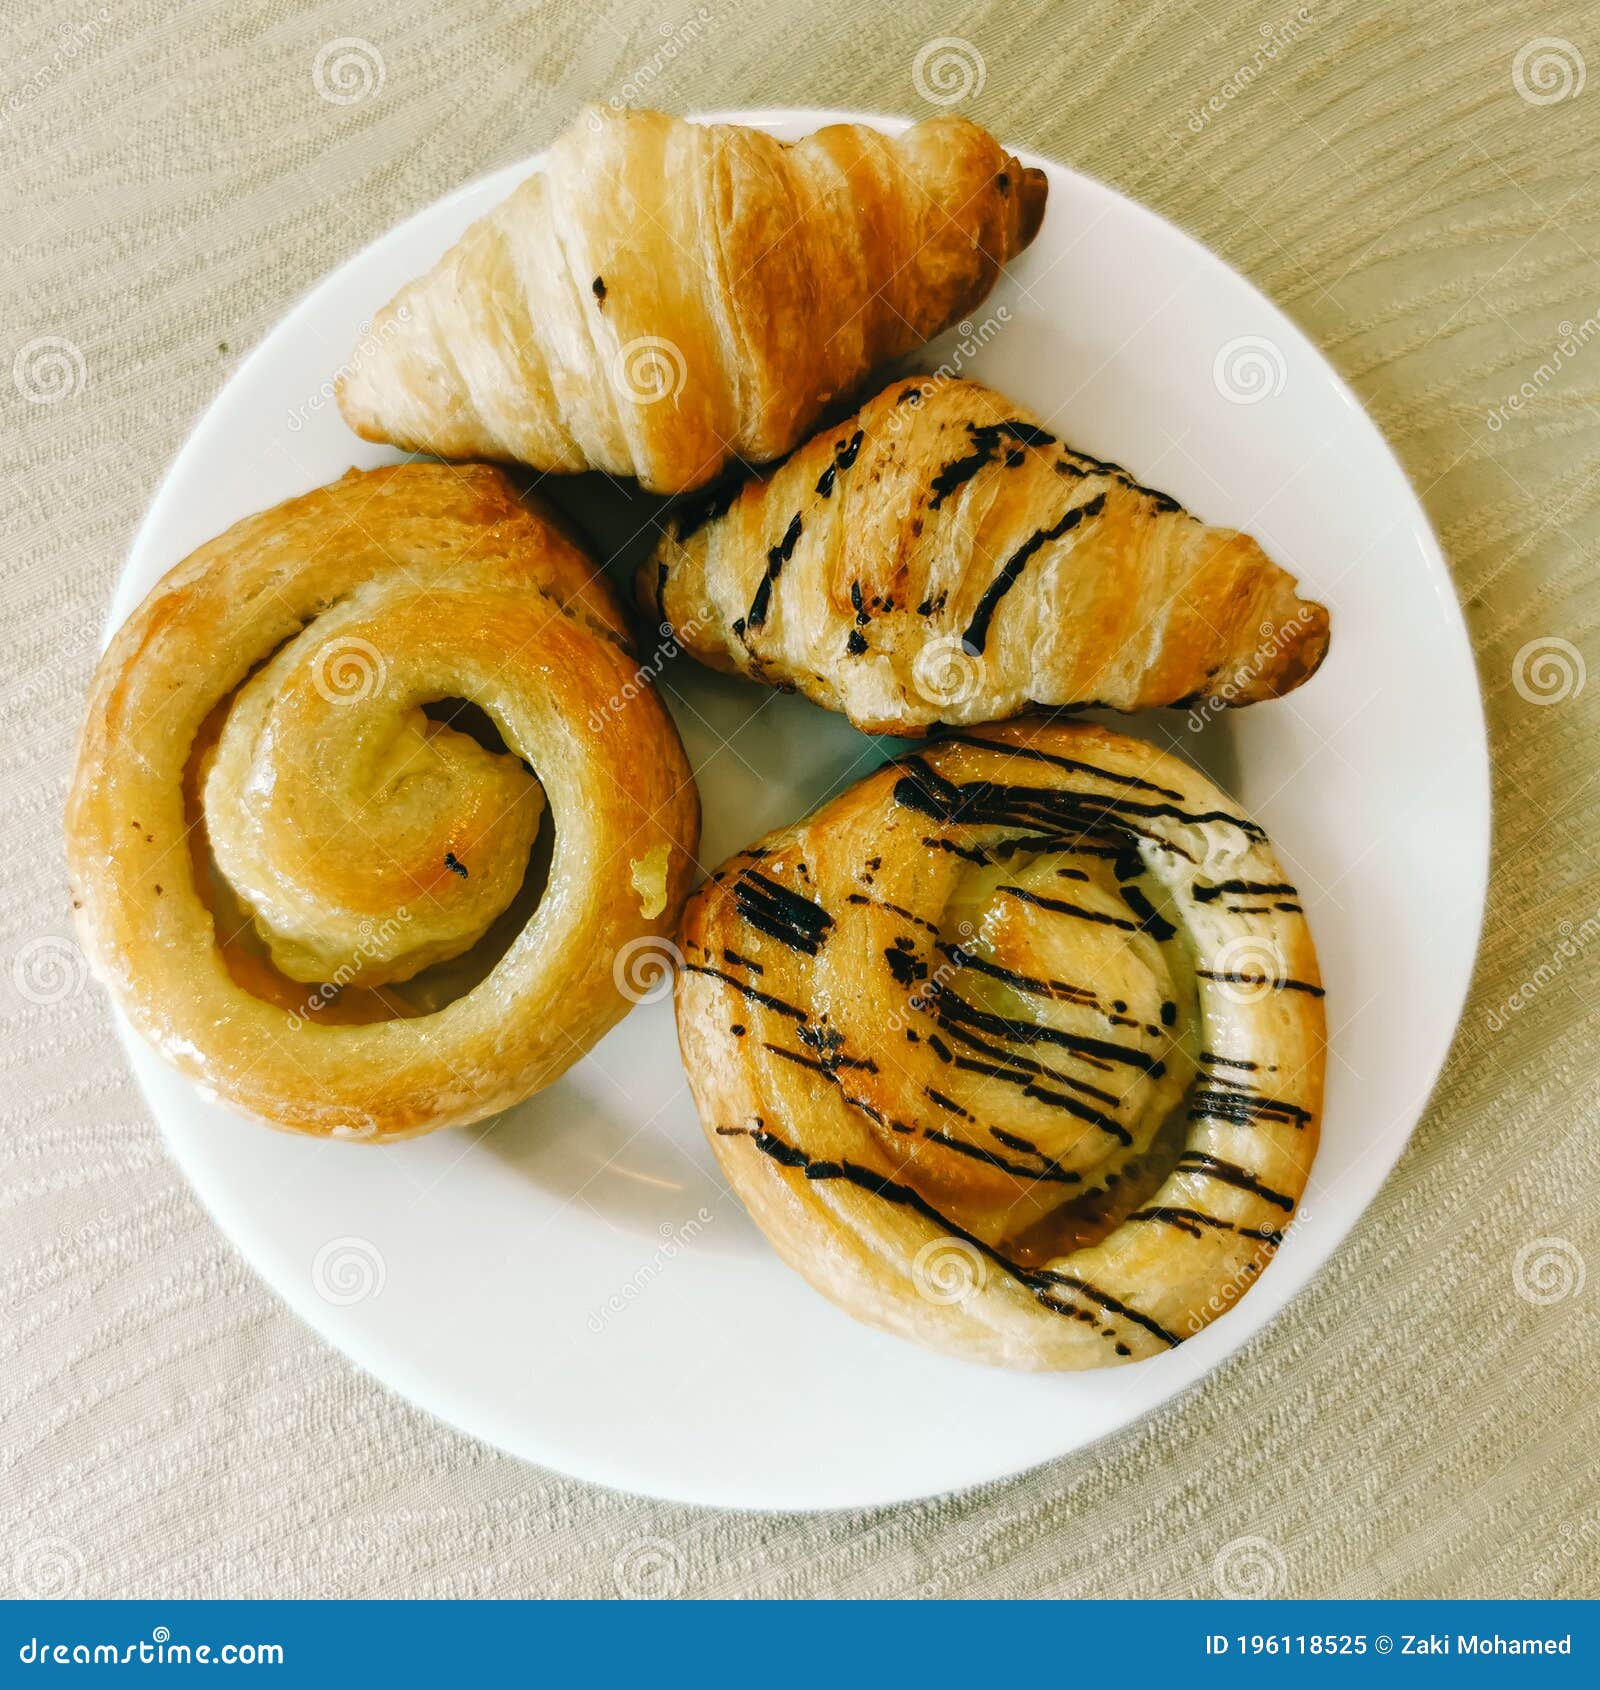 danish pastry. this pastry type is named danish because it originates from denmark.